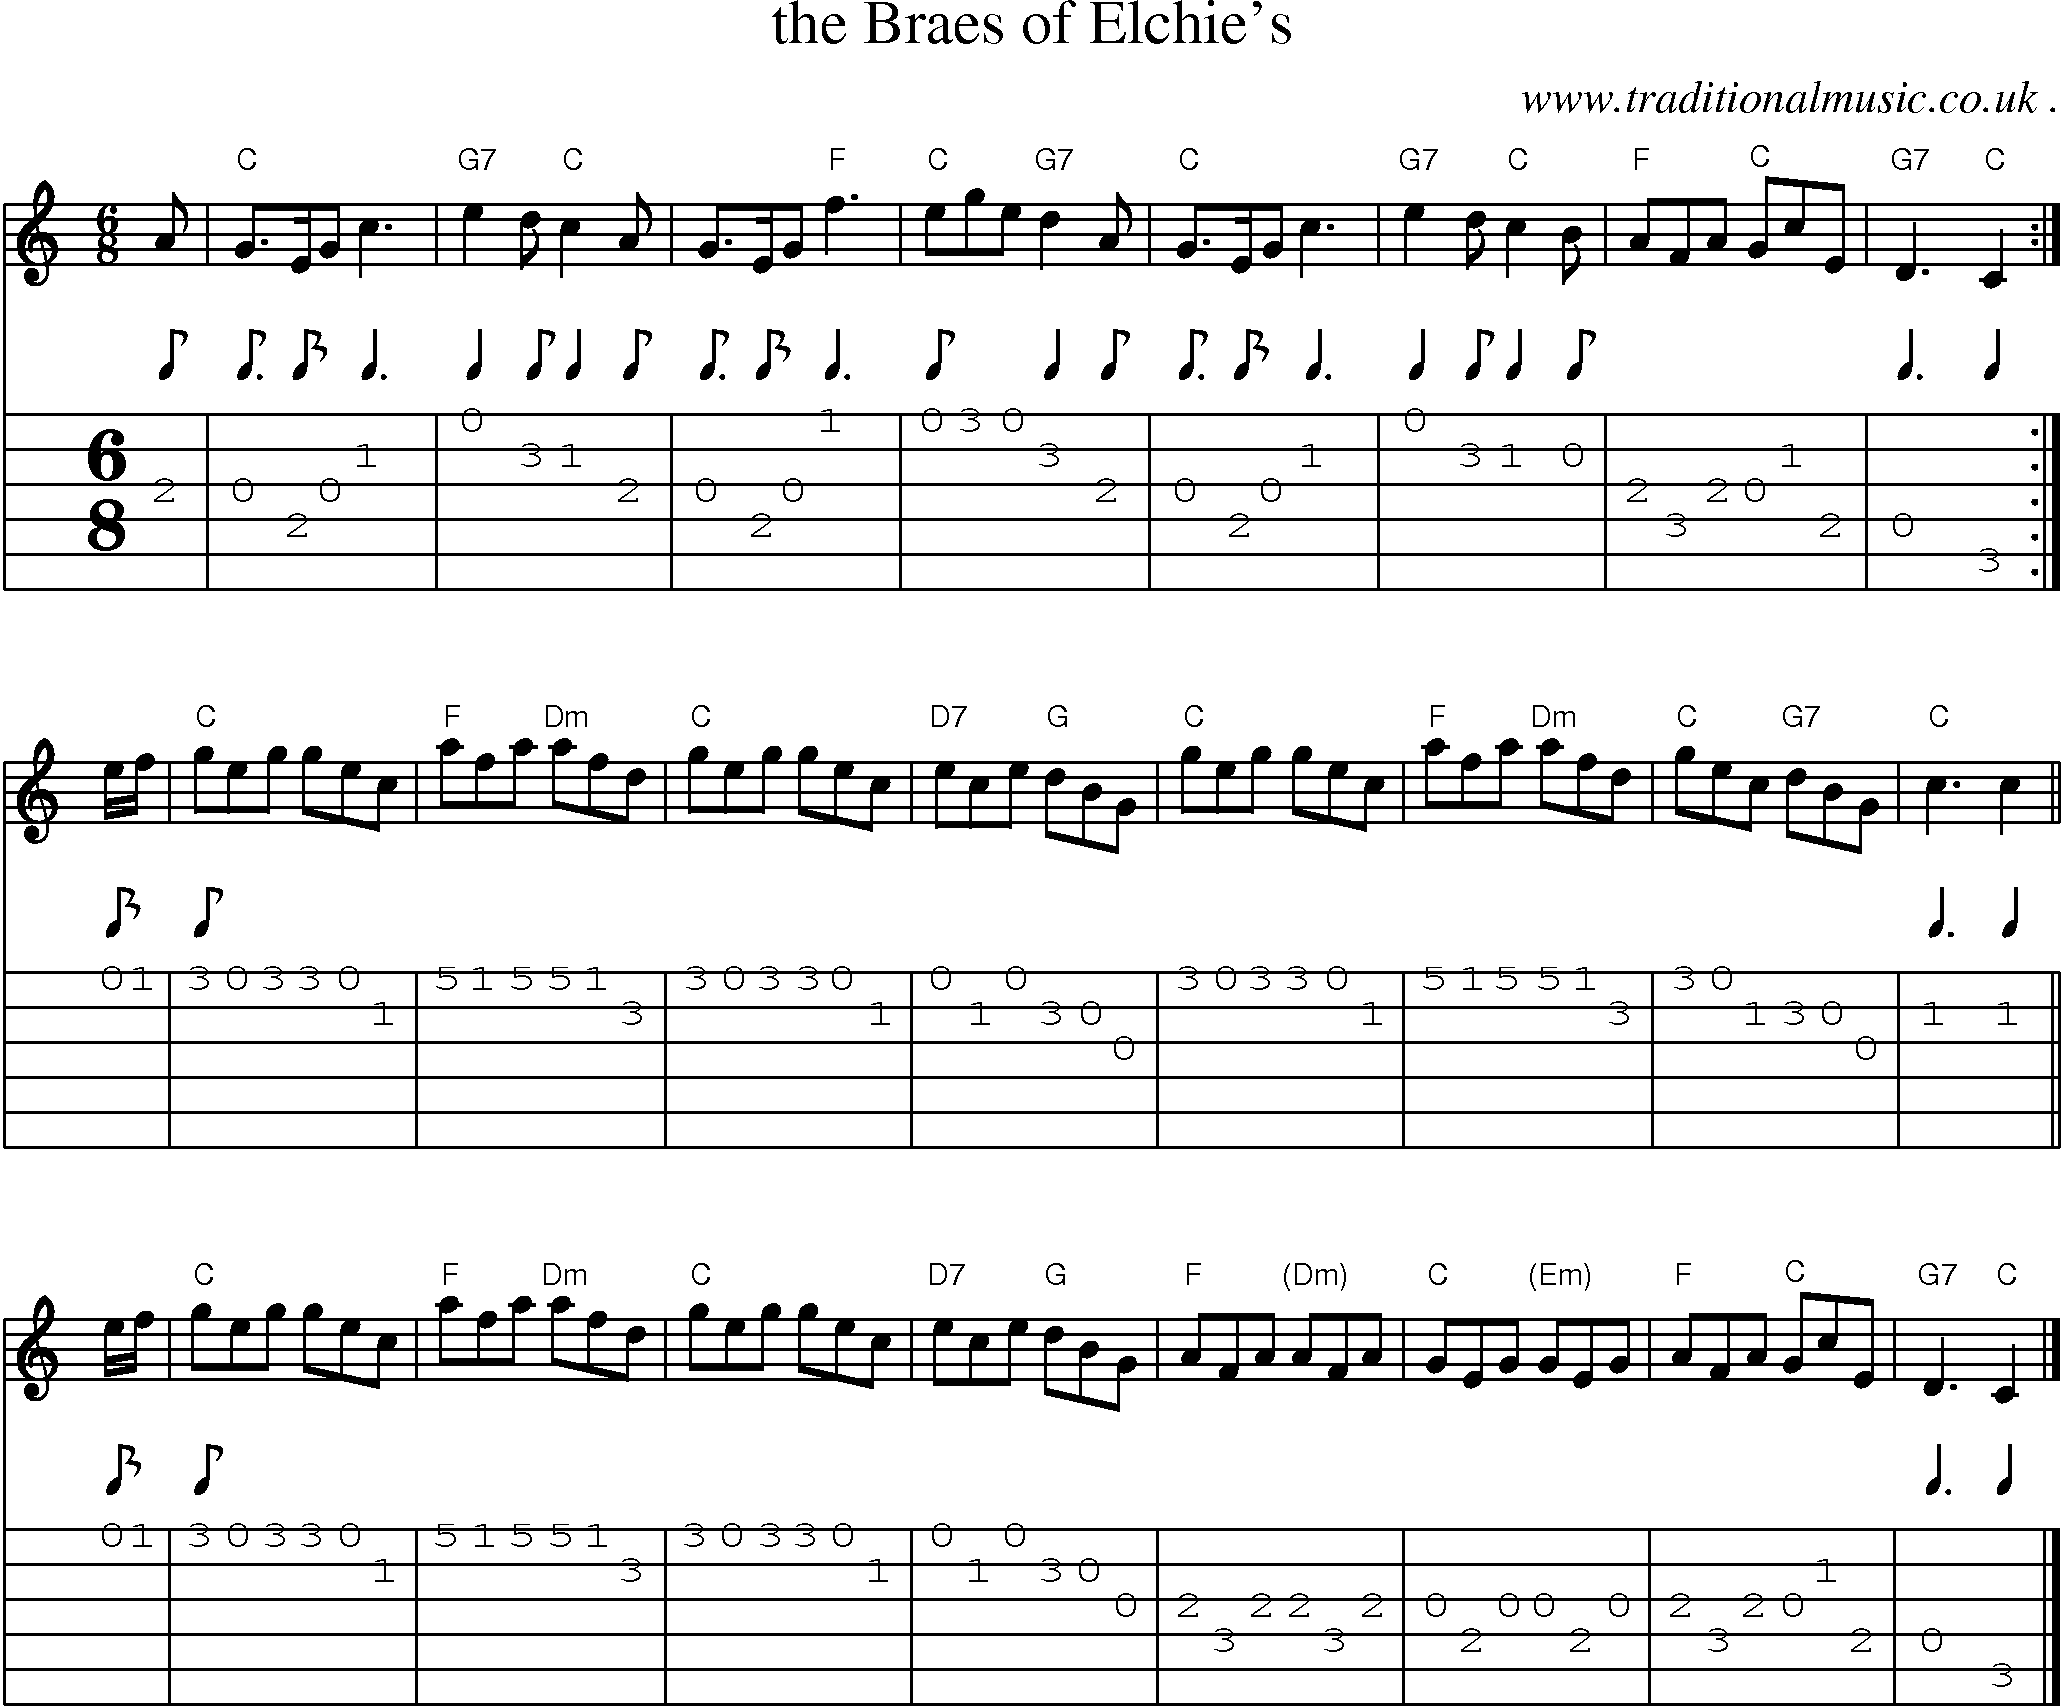 Sheet-music  score, Chords and Guitar Tabs for The Braes Of Elchies